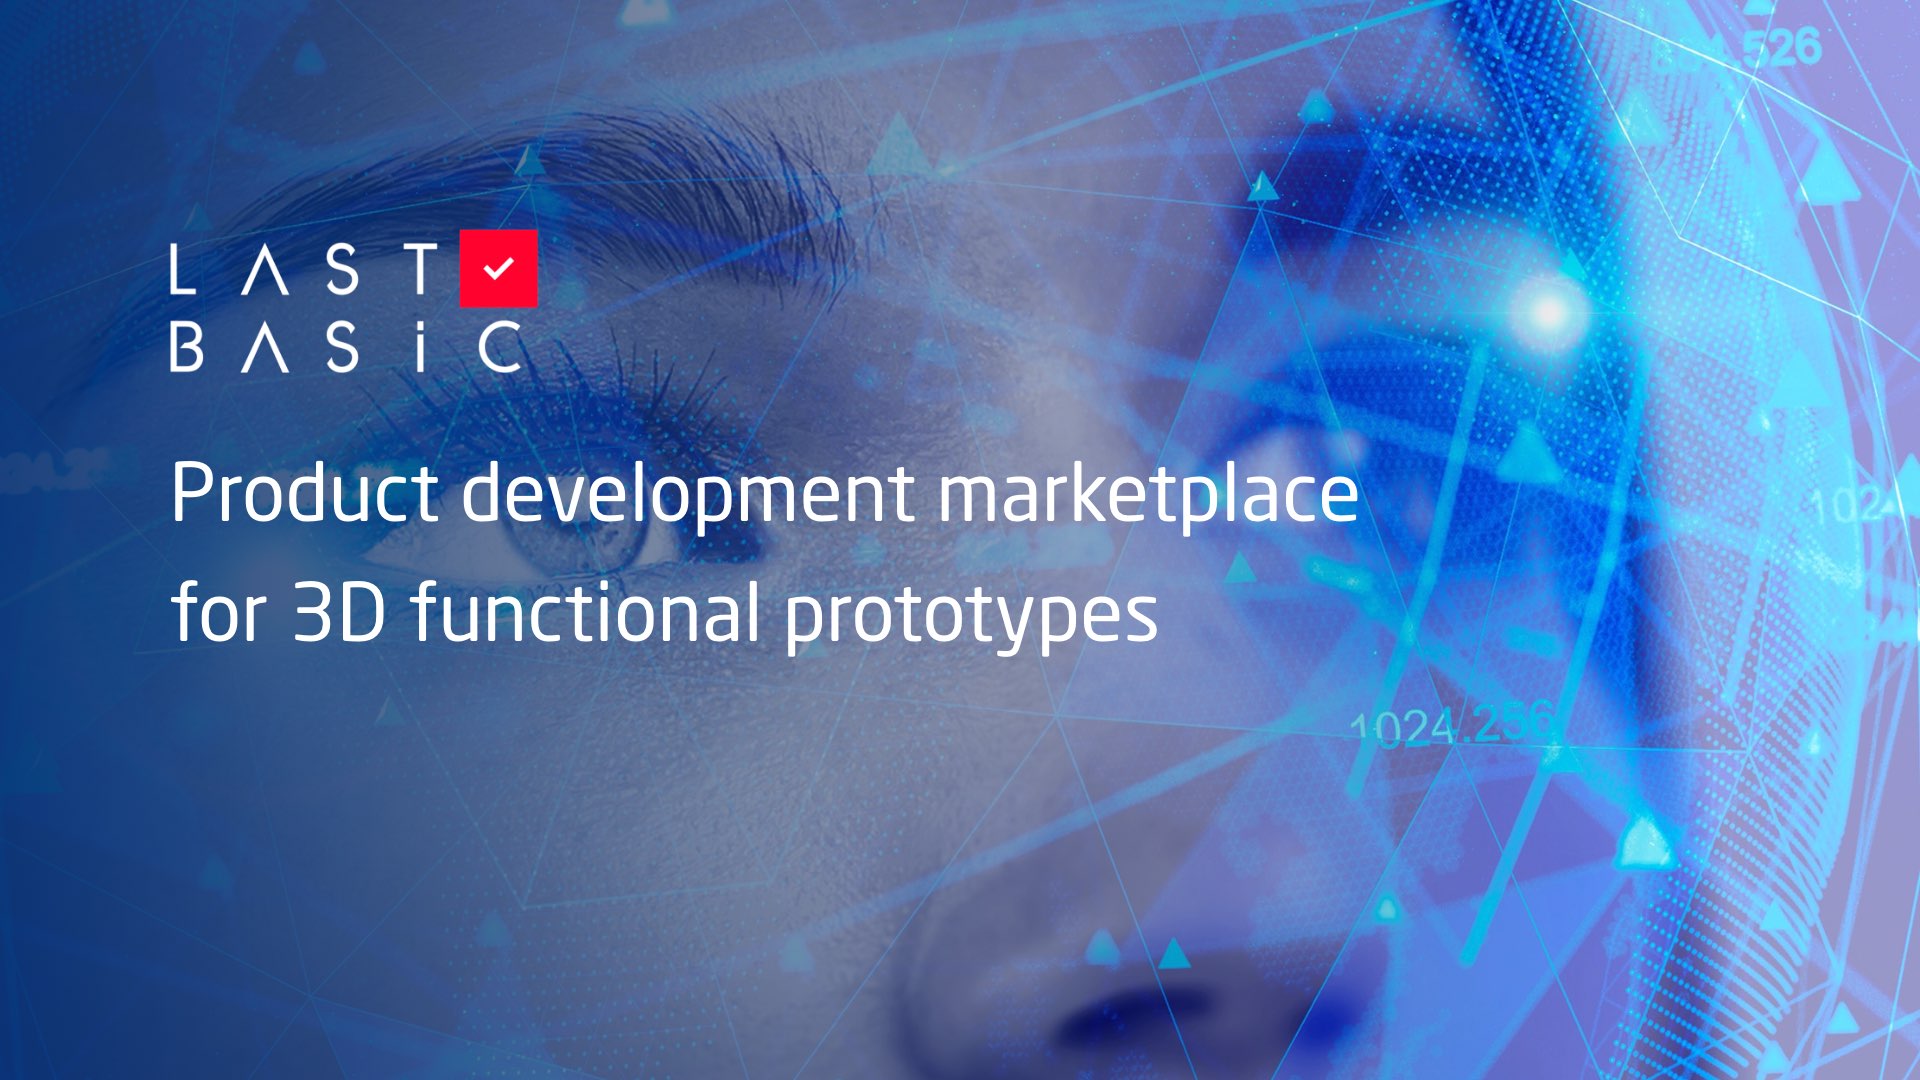 LastBasic startup - a product development marketplace for 3D functional prototypes